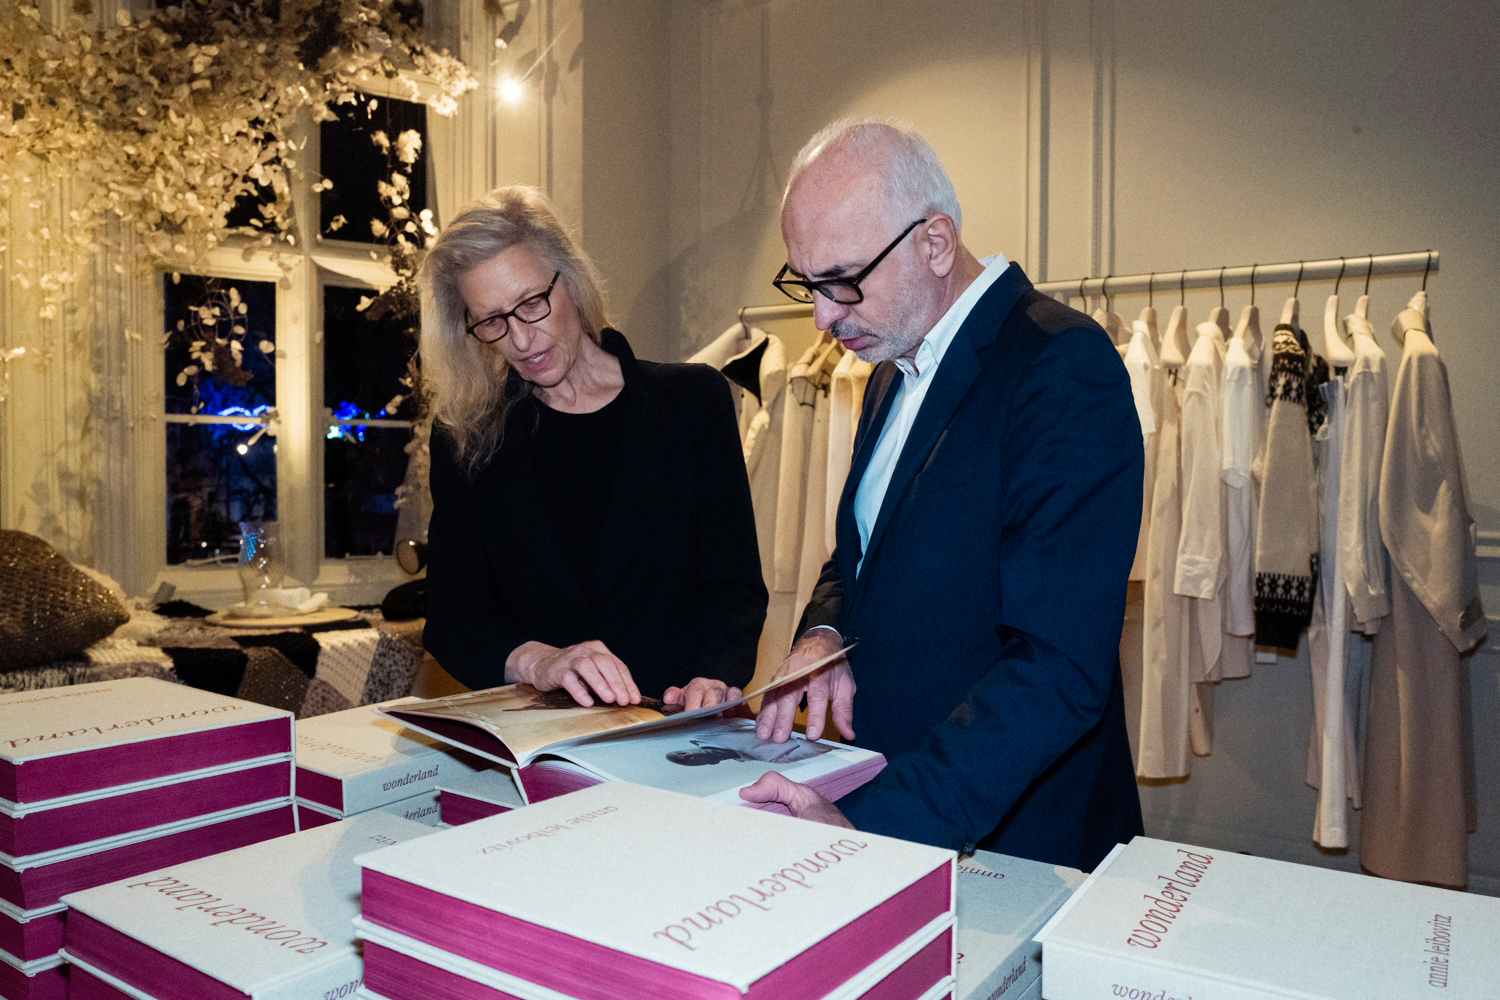 Annie Leibovitz and MATCHESFASHION CEO Paolo de Cesare at the Annie Leibovitz Wonderland book launch at MATCHESFASHION, 3 Carlos Place, London - photo by James D. Kelly